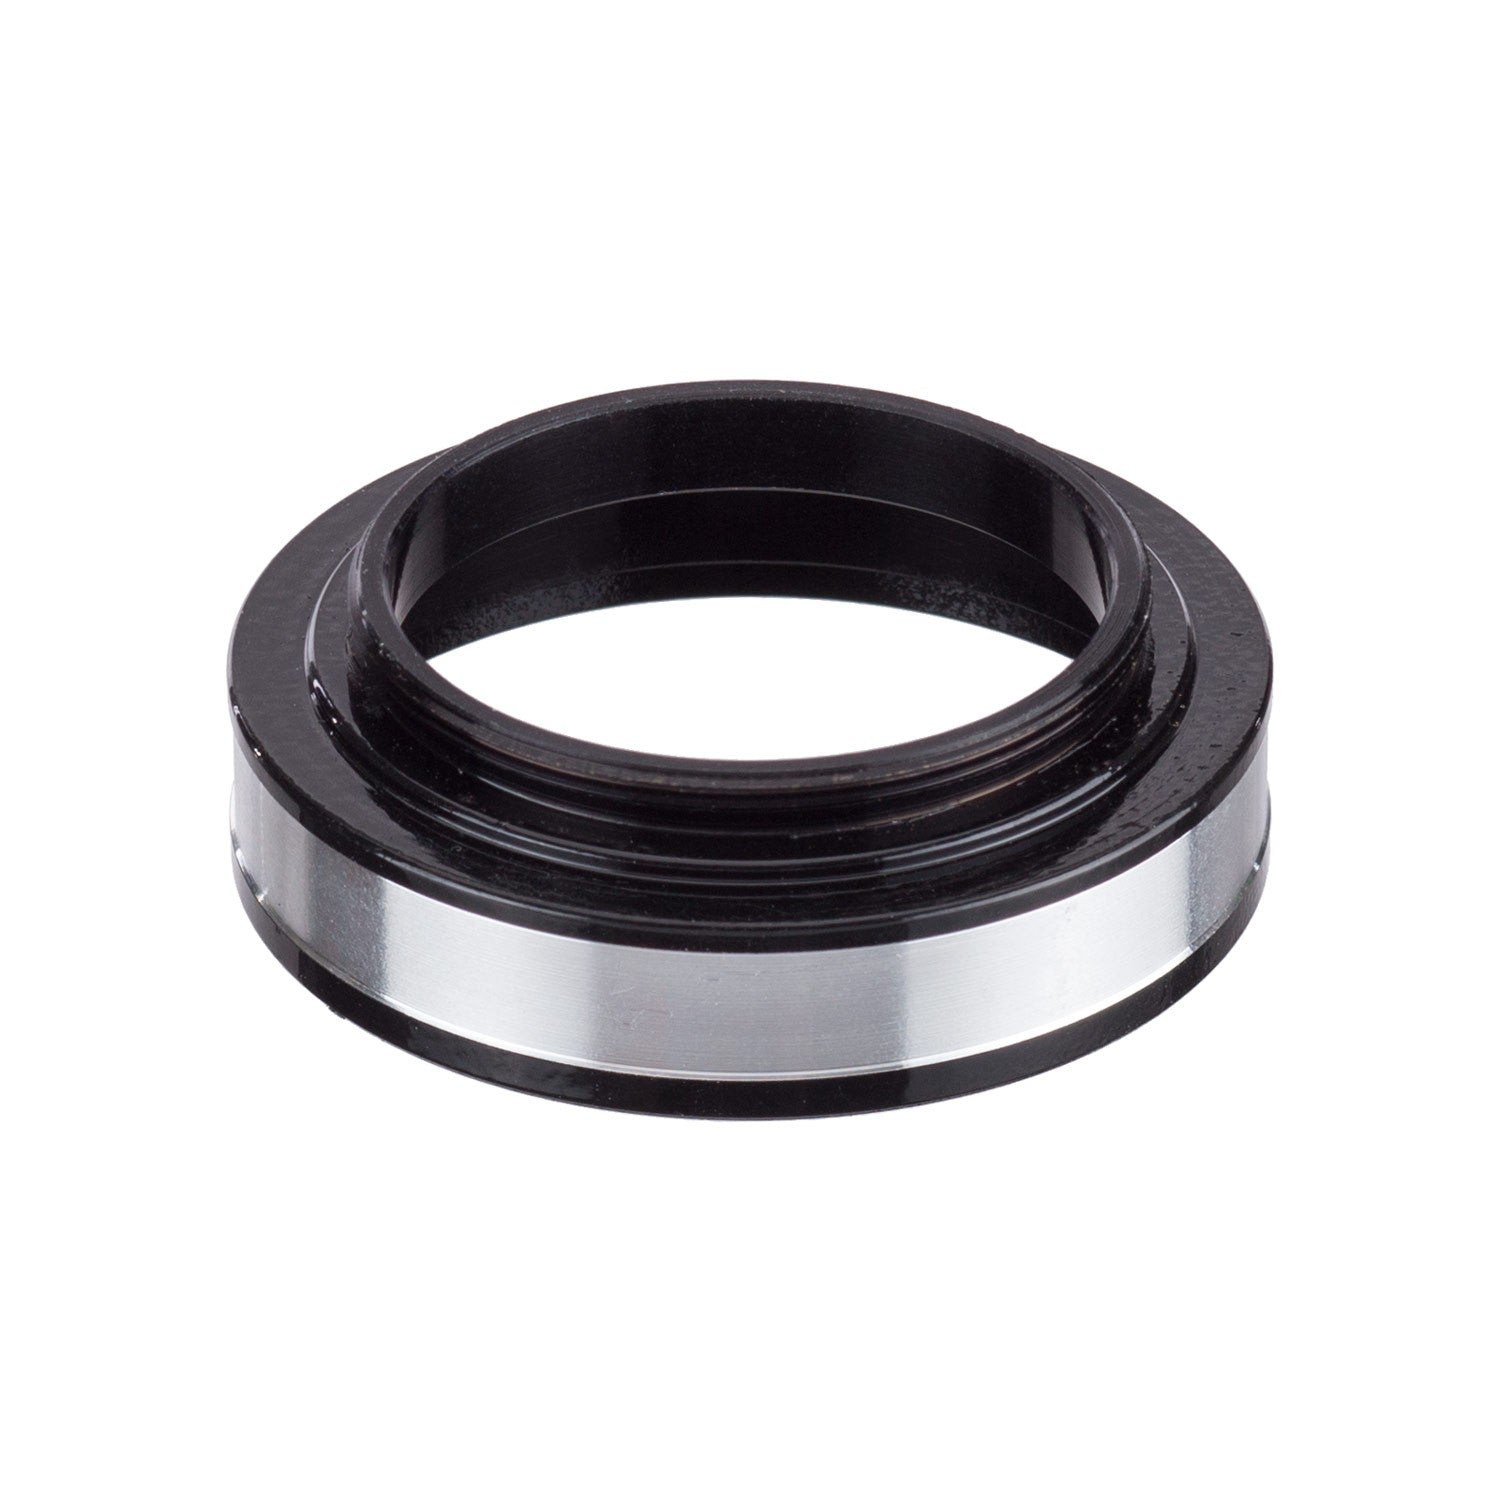 Bausch & Lomb StereoZoom Ring Light Adapter